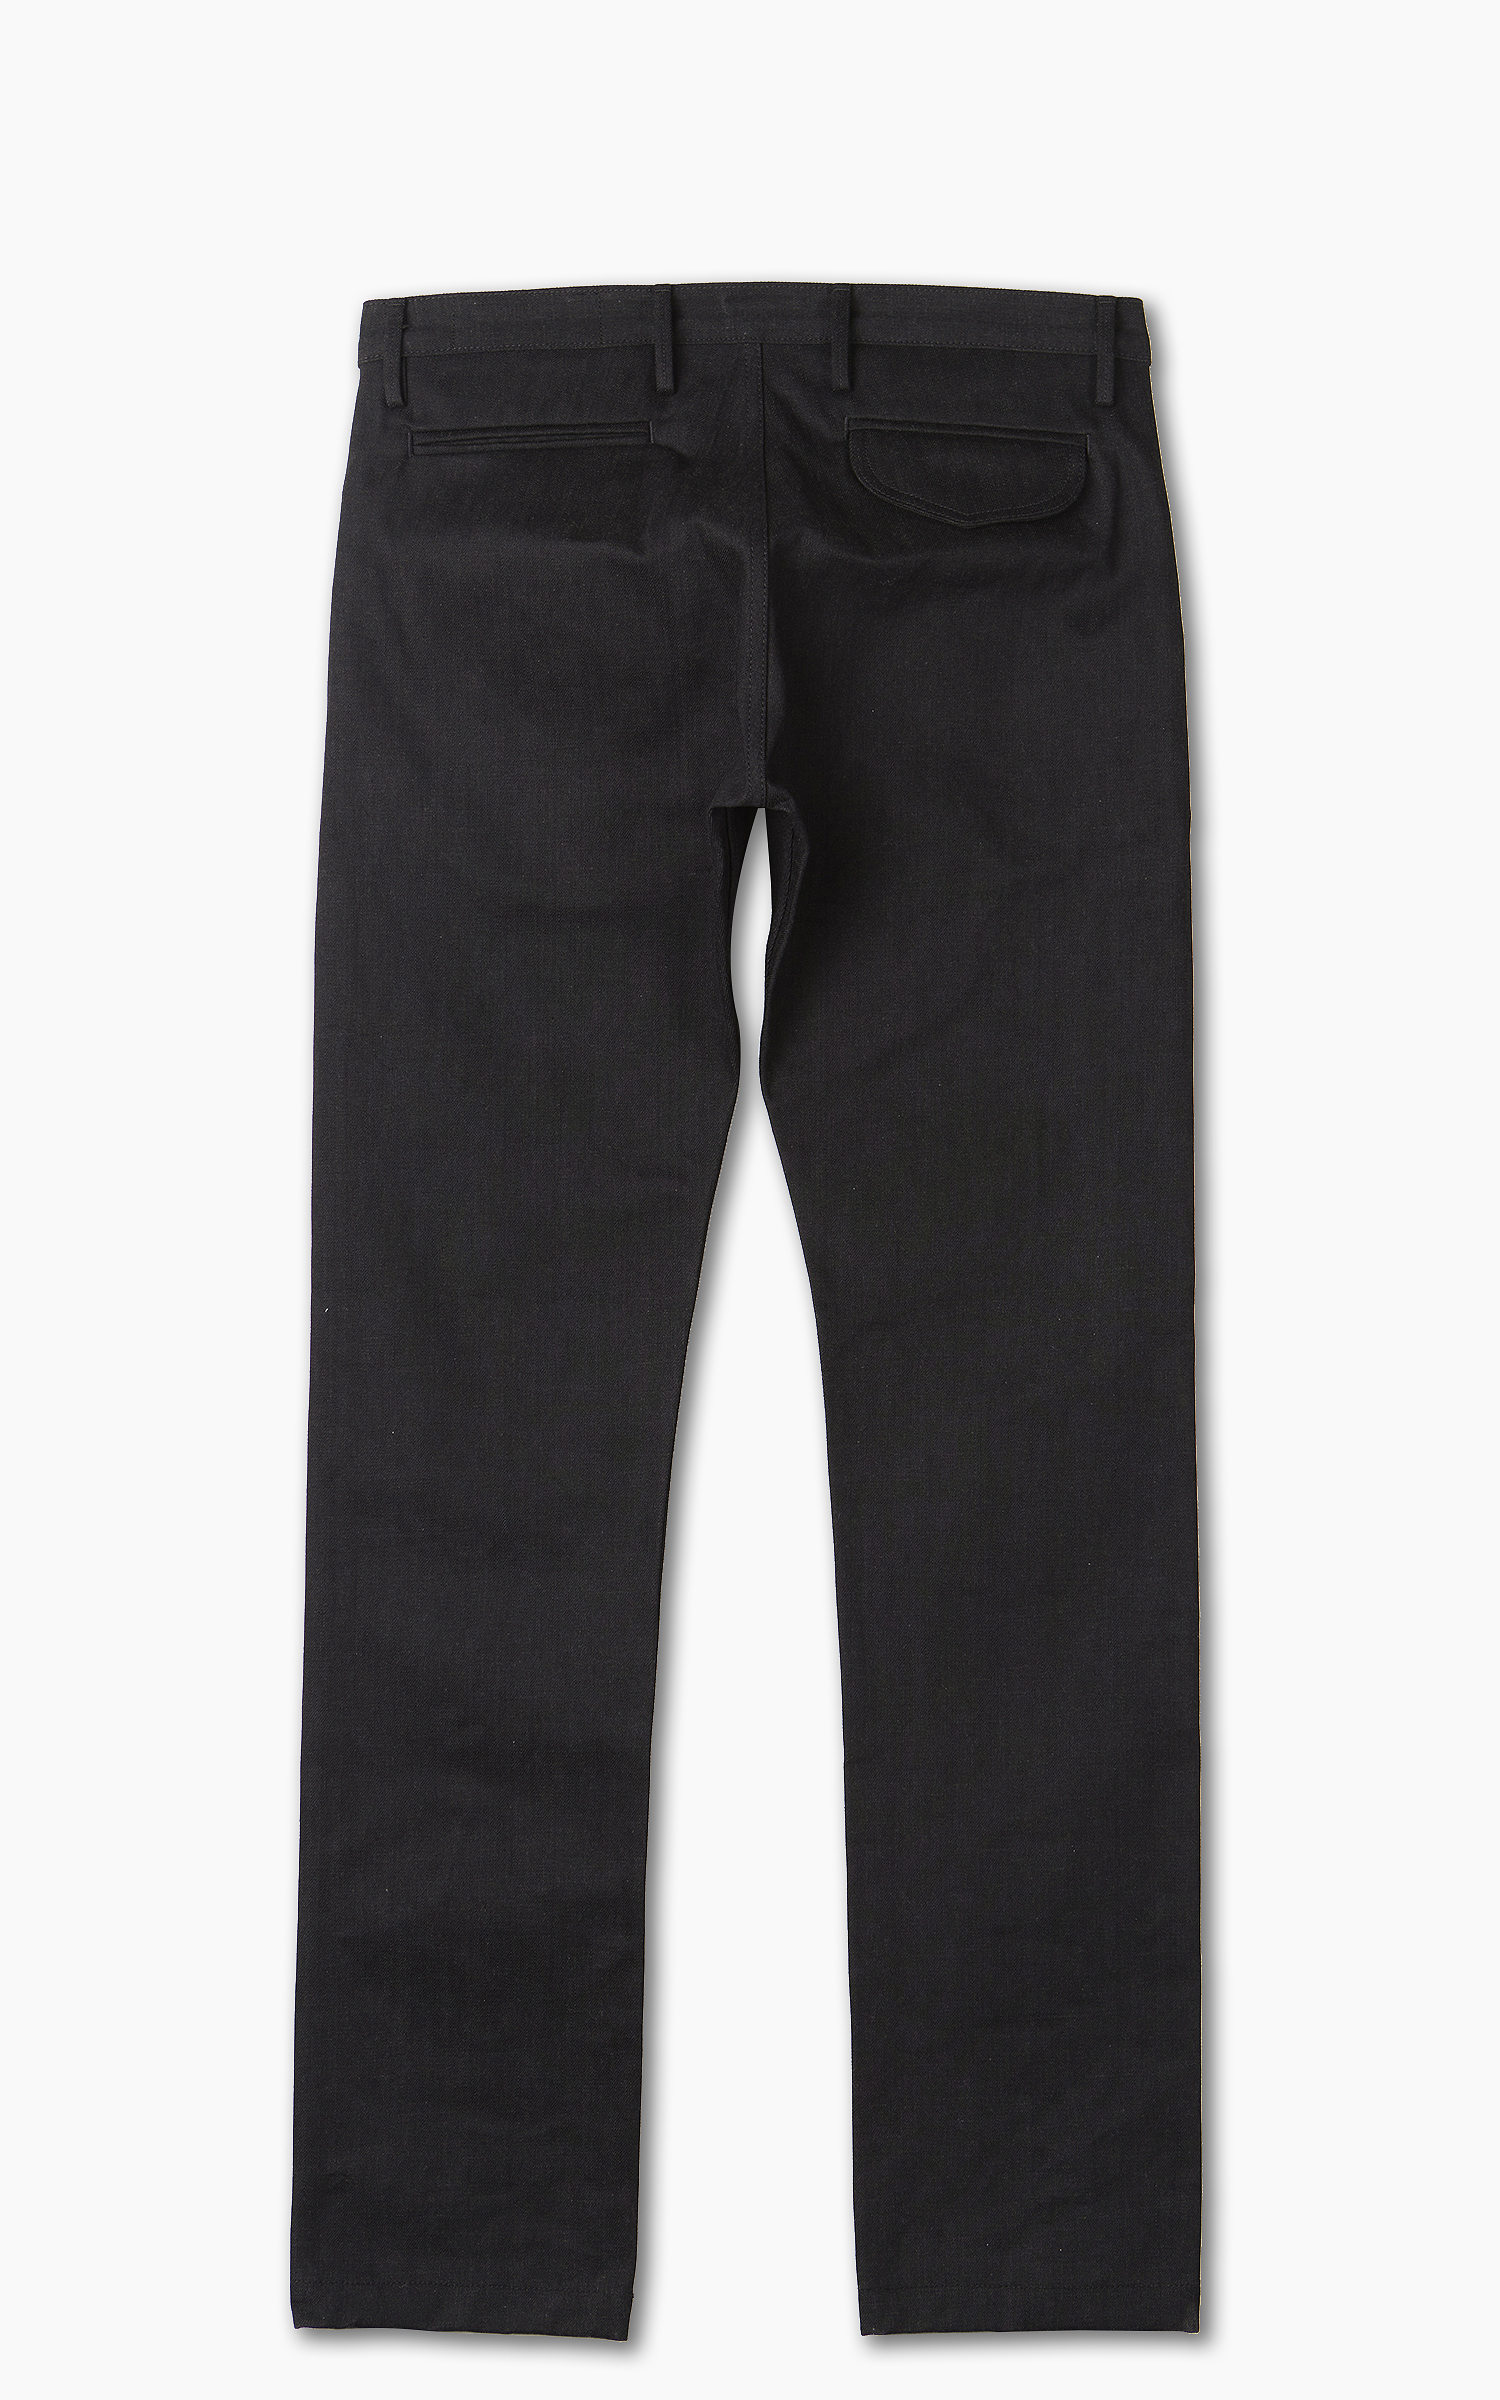 Rogue Territory Officer Trouser Stealth Black 15oz | Cultizm